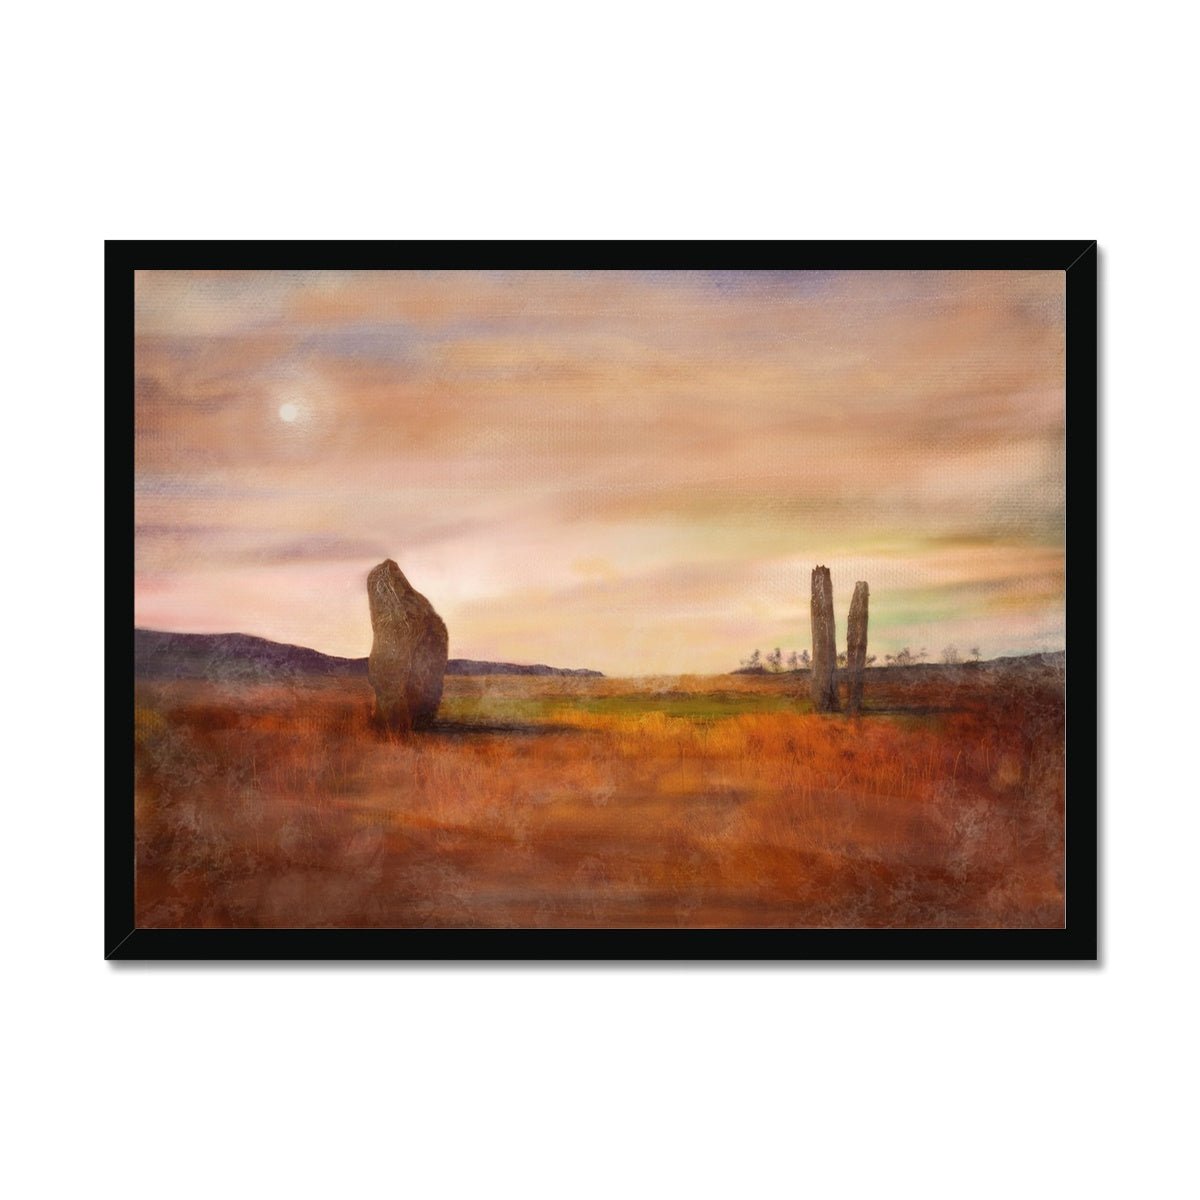 Machrie Moor Moonlight Painting | Framed Prints From Scotland-Framed Prints-Arran Art Gallery-A2 Landscape-Black Frame-Paintings, Prints, Homeware, Art Gifts From Scotland By Scottish Artist Kevin Hunter